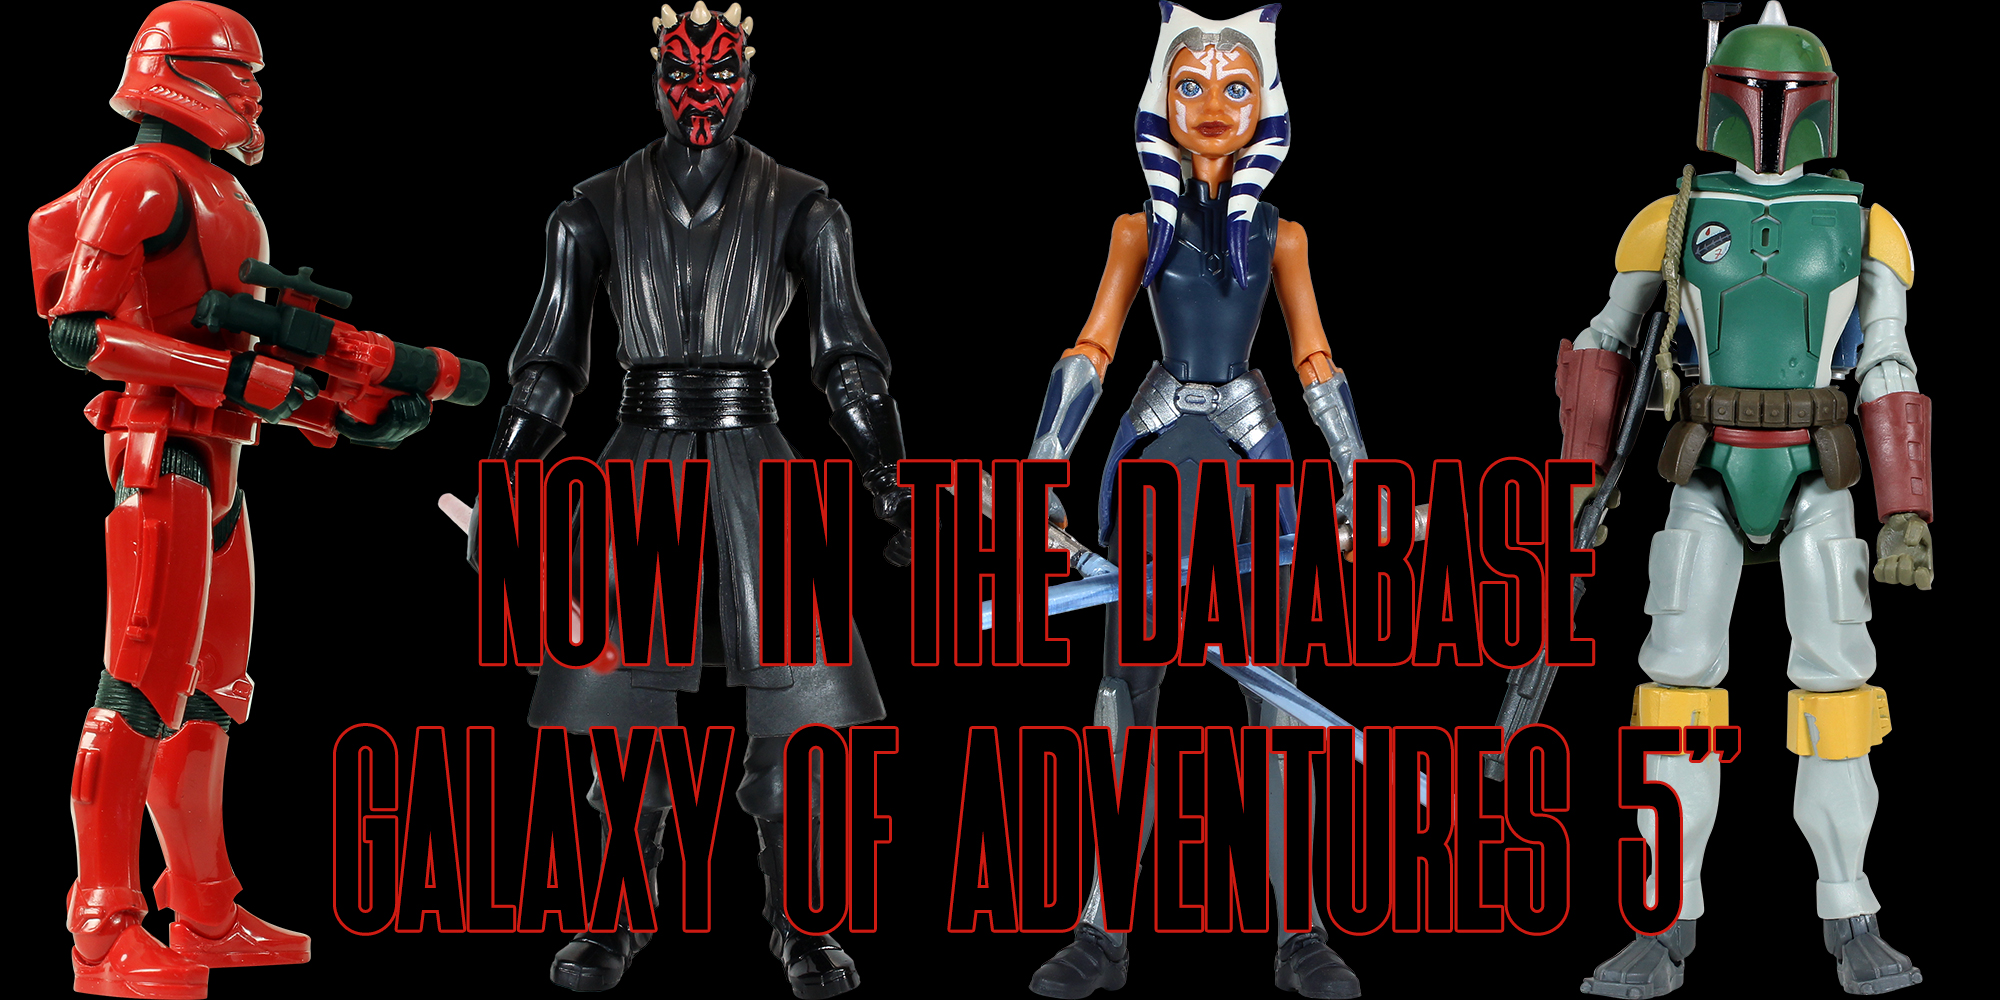 Database Updated: New Galaxy Of Adventures 5" Figures Added